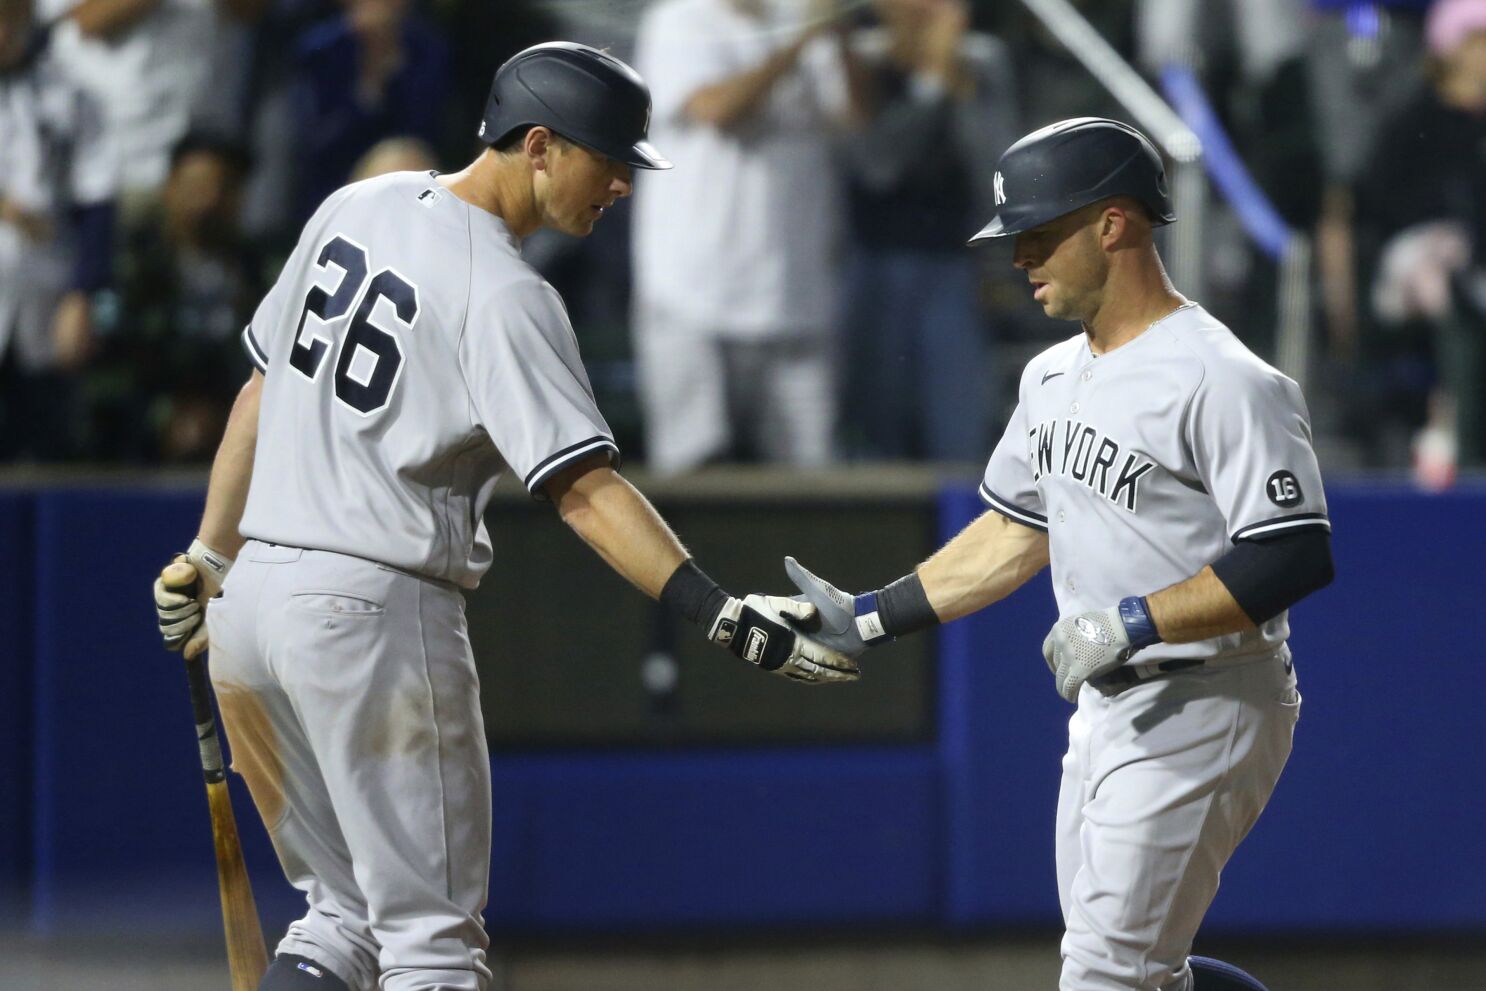 Frazier snaps tie, Yankees come back to beat Blue Jays 6-5 - The